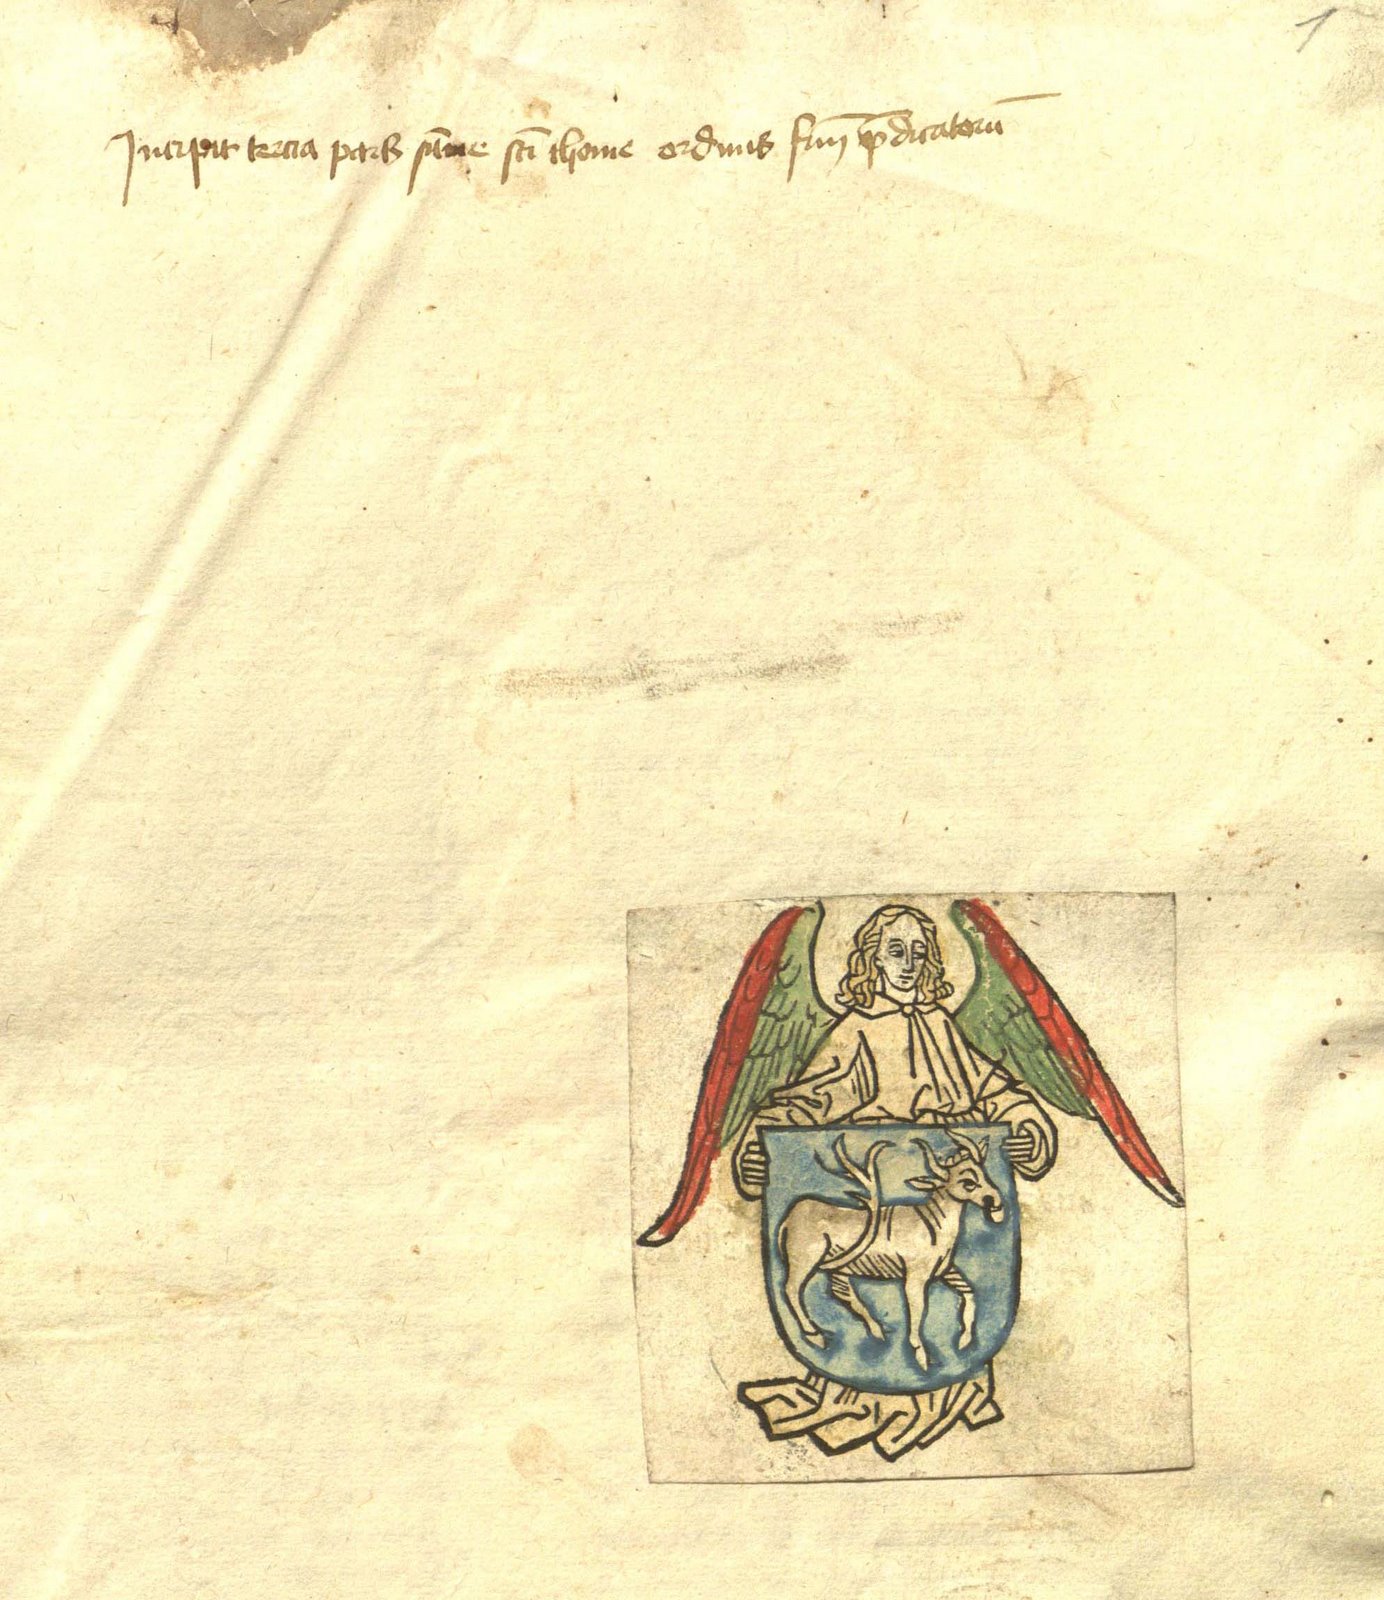 Scan of Thomas Aquinas's colorful bookplate (circa 1470s). It includes an inscription as well as an angel bearing a blue shield, which displays an ox argent.